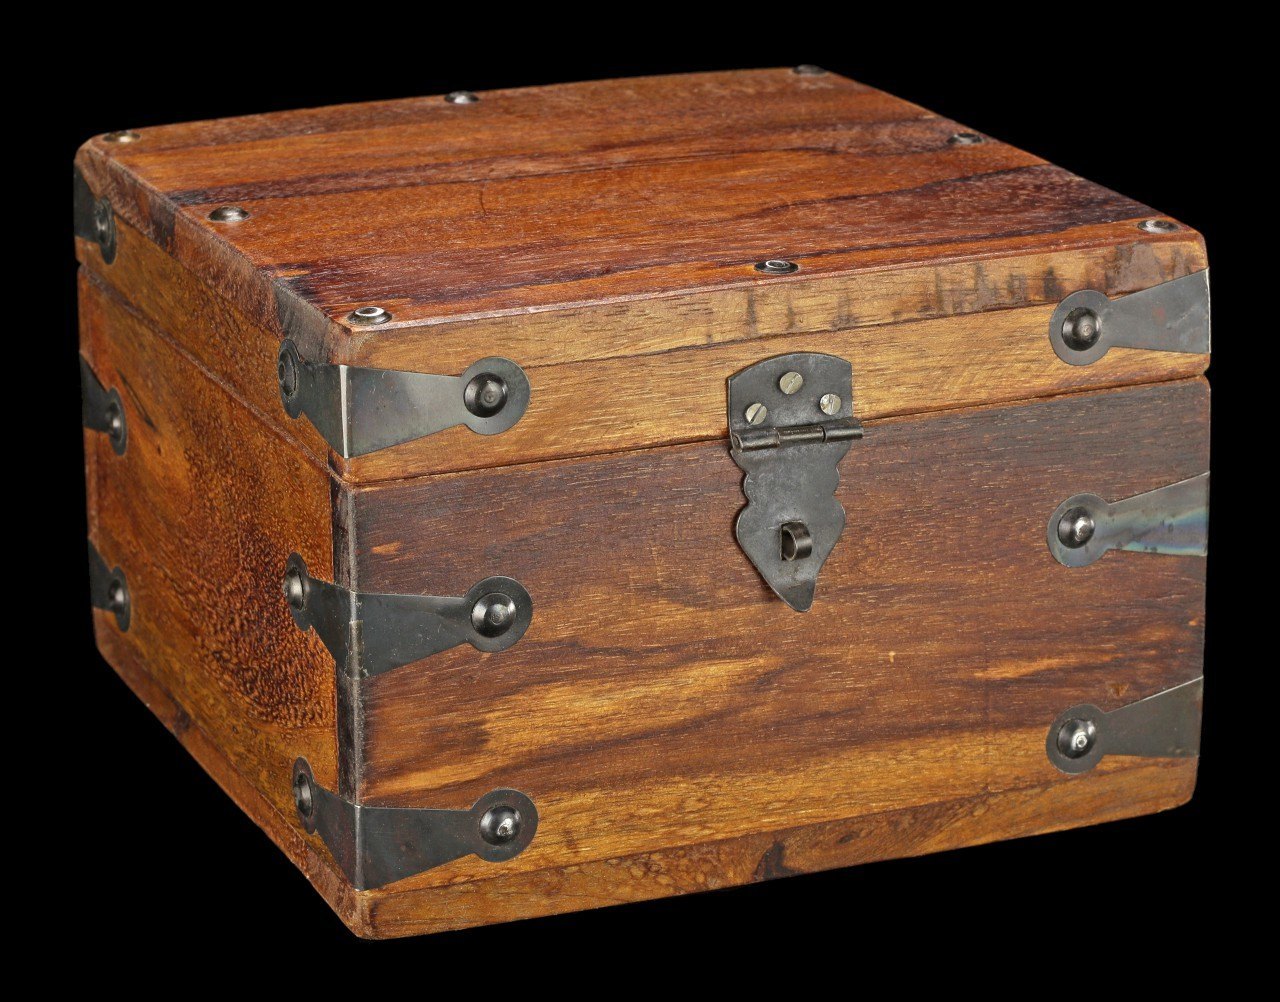 Medieval Wooden Chest - Rectangulary